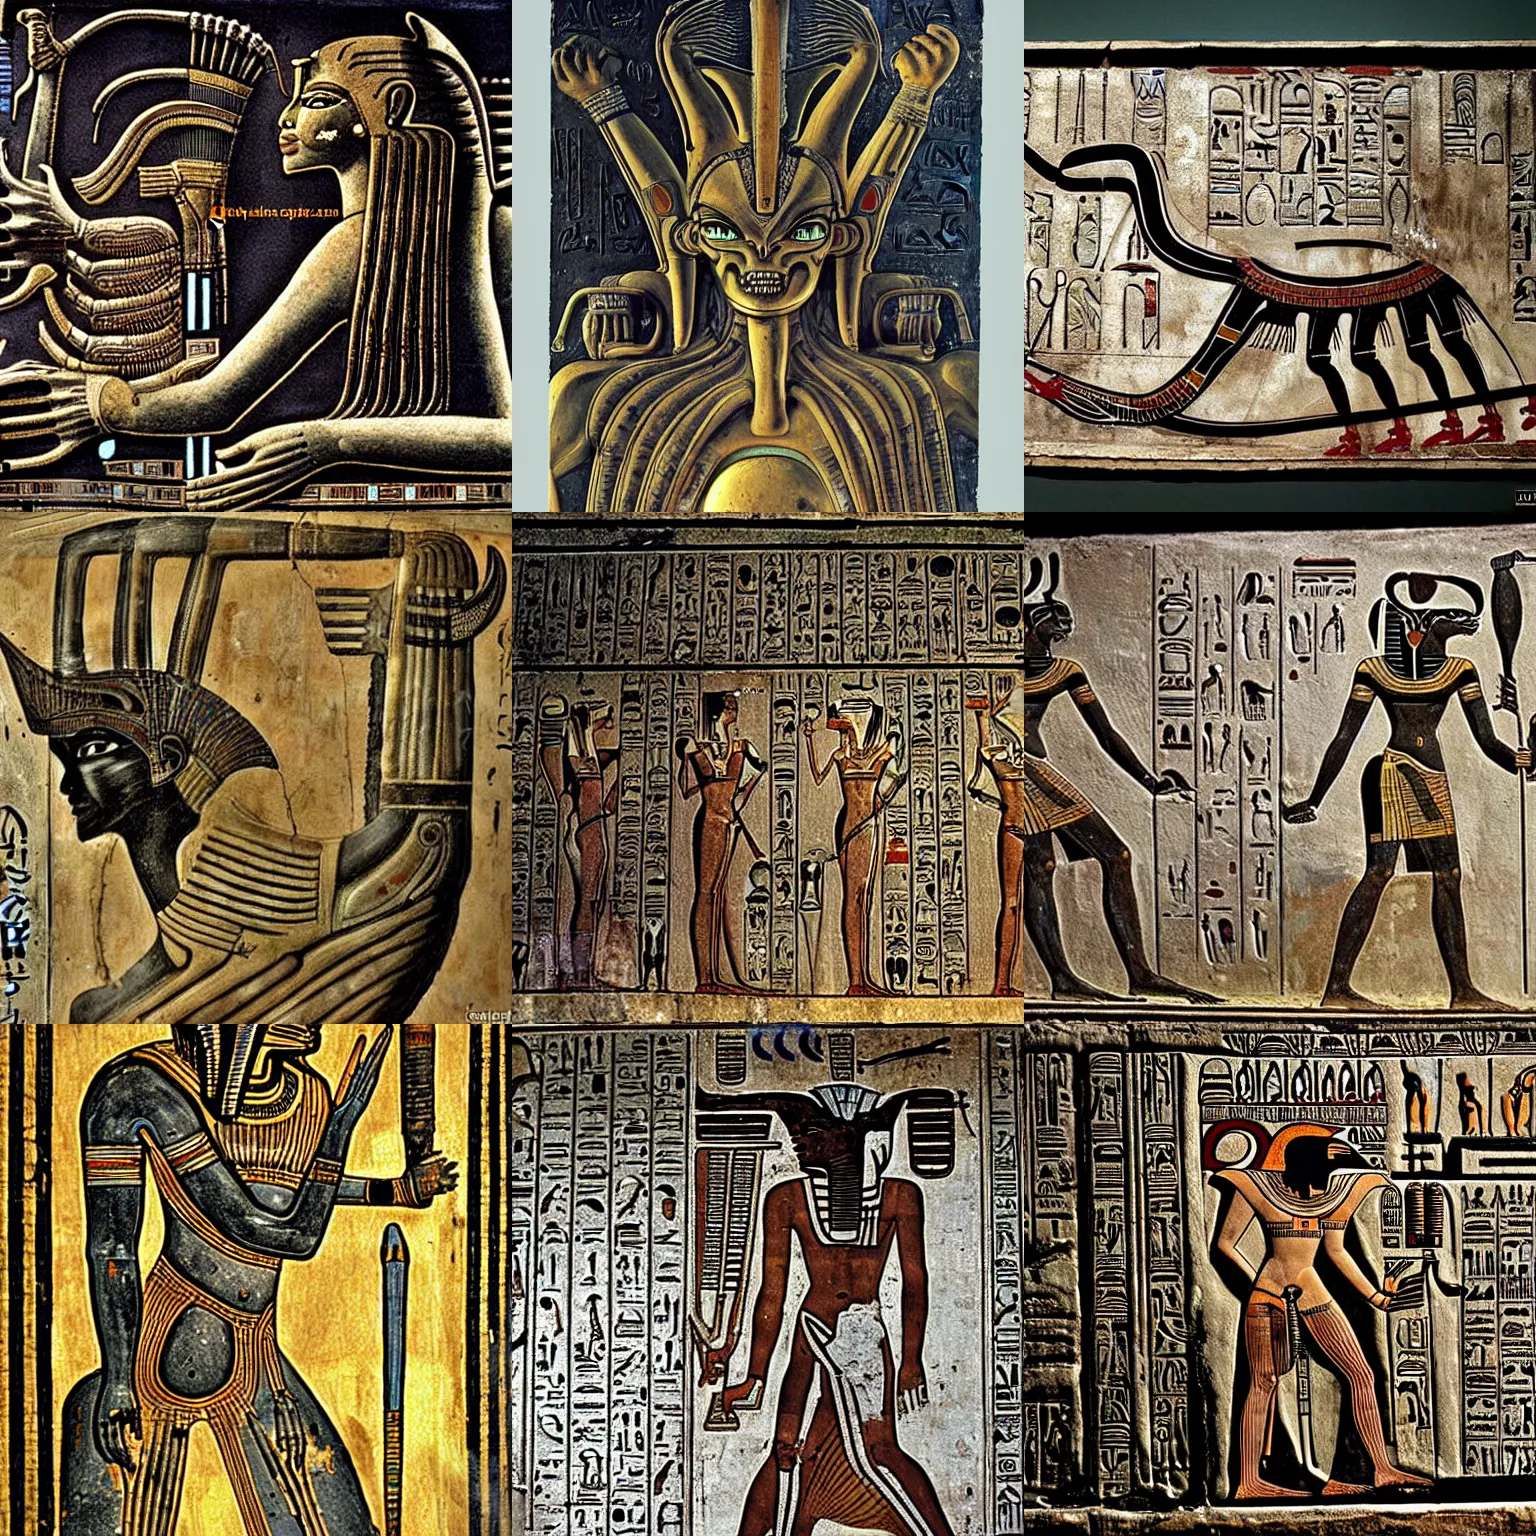 Prompt: ancient egyptian art of [ xenomorph by giger ] from alien movie, as egyptian mural